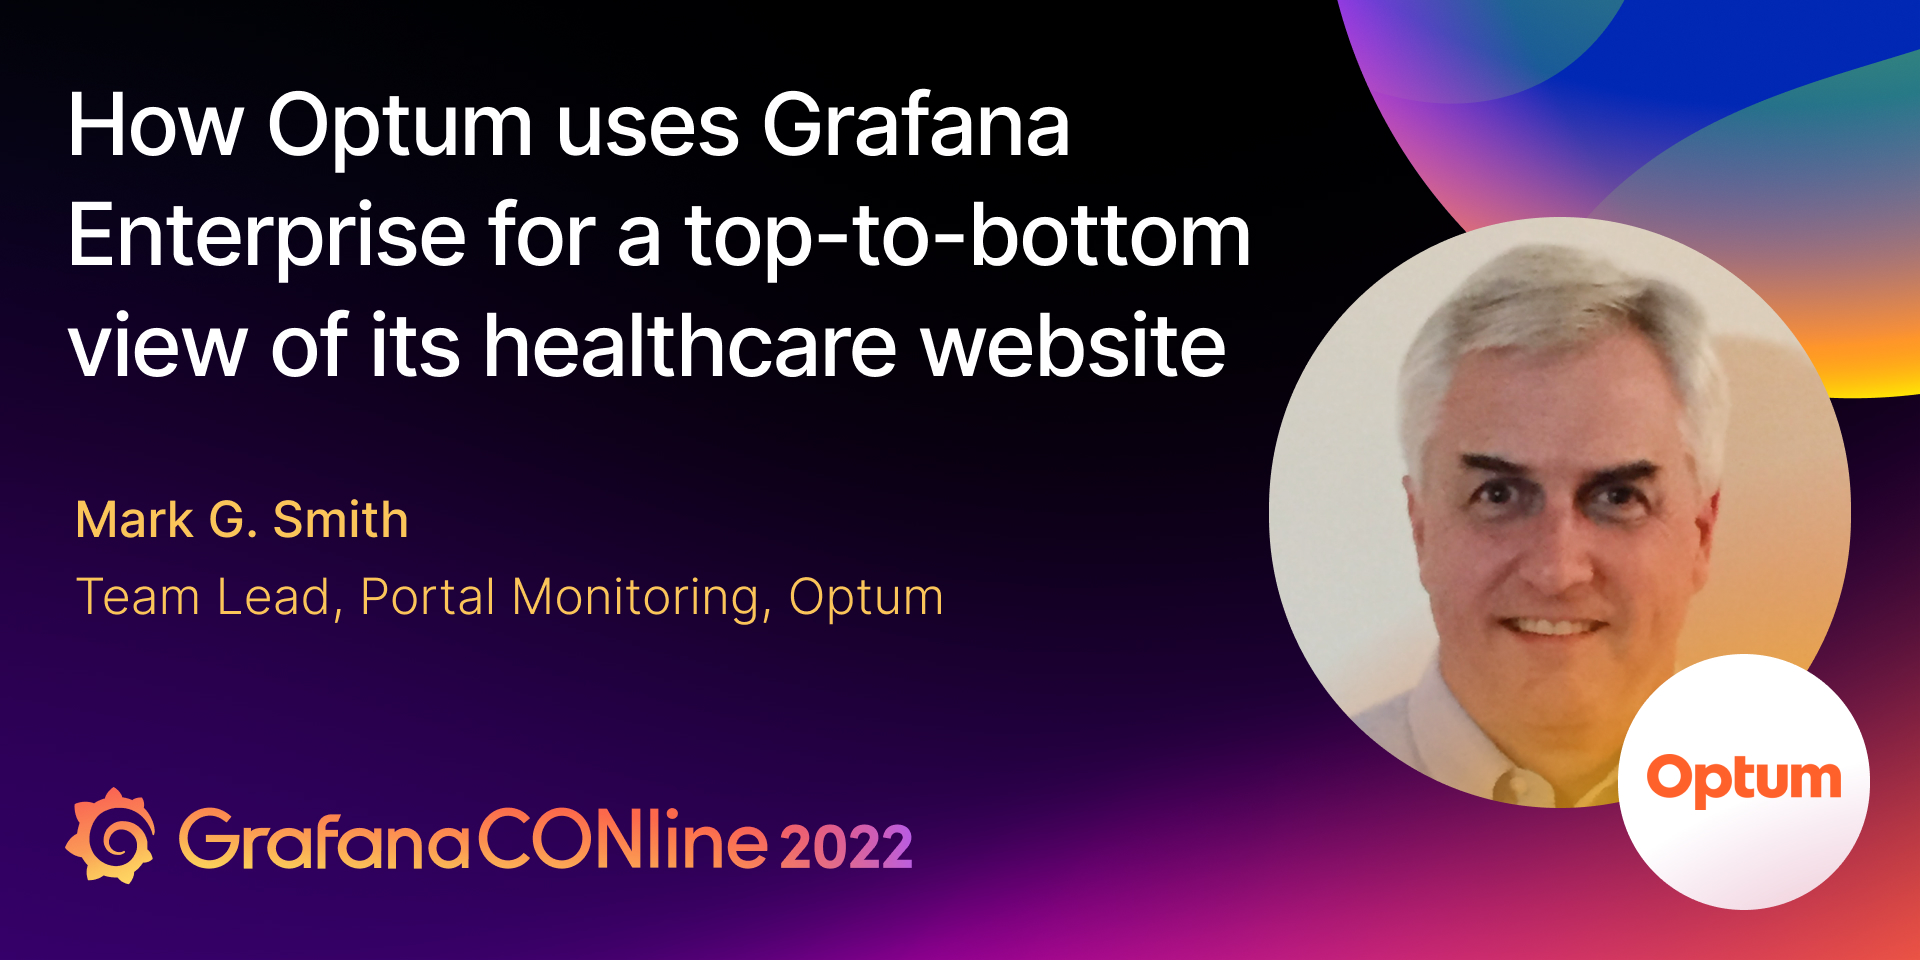 Session about how Grafana Enterprise used for Optum's healthcare website at GrafanaCONline 2022